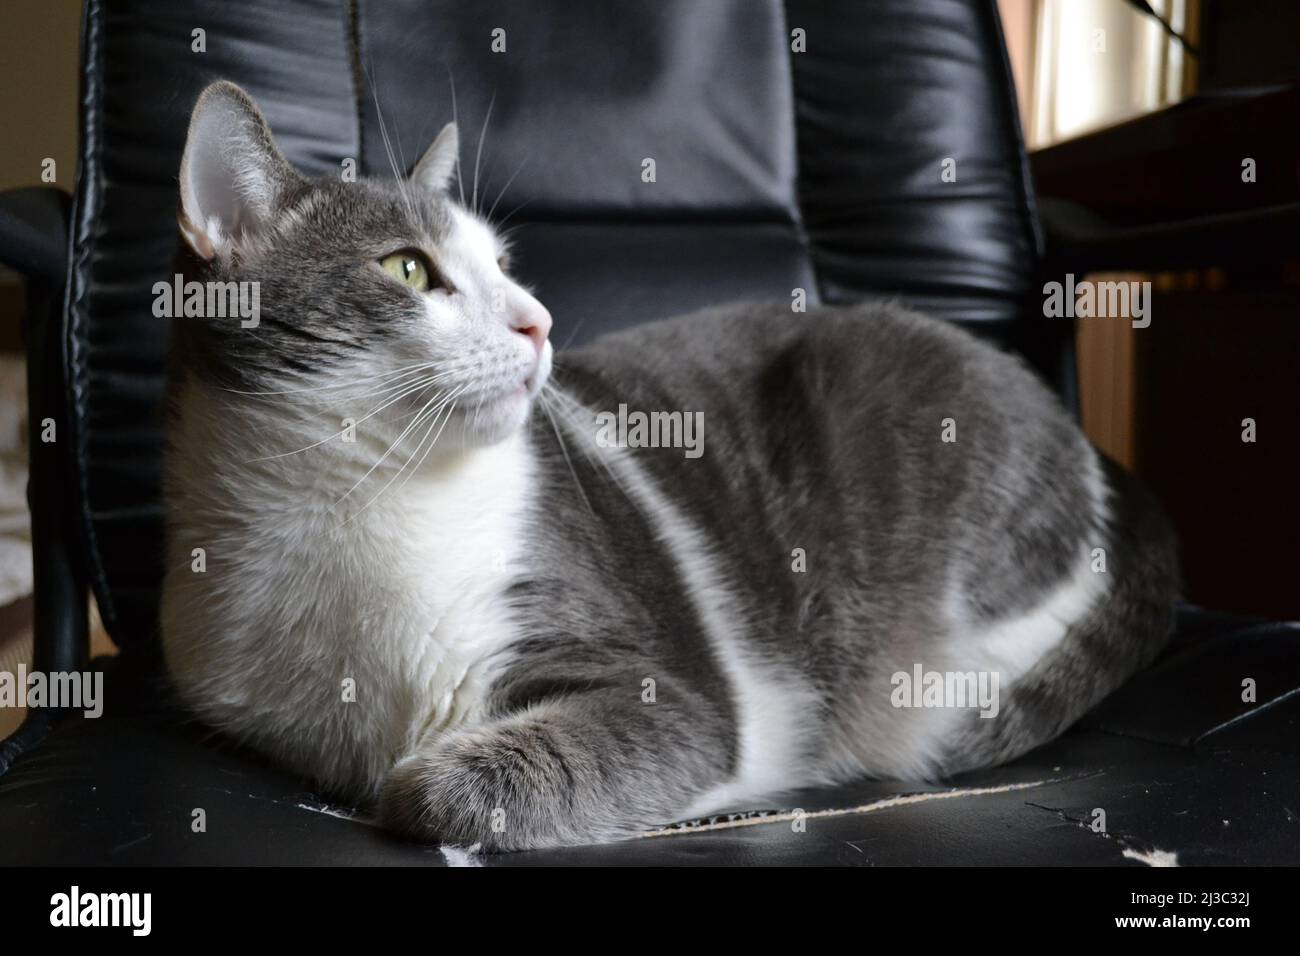 Portrait of a gray and white cat in a black leather armchair. Stock Photo